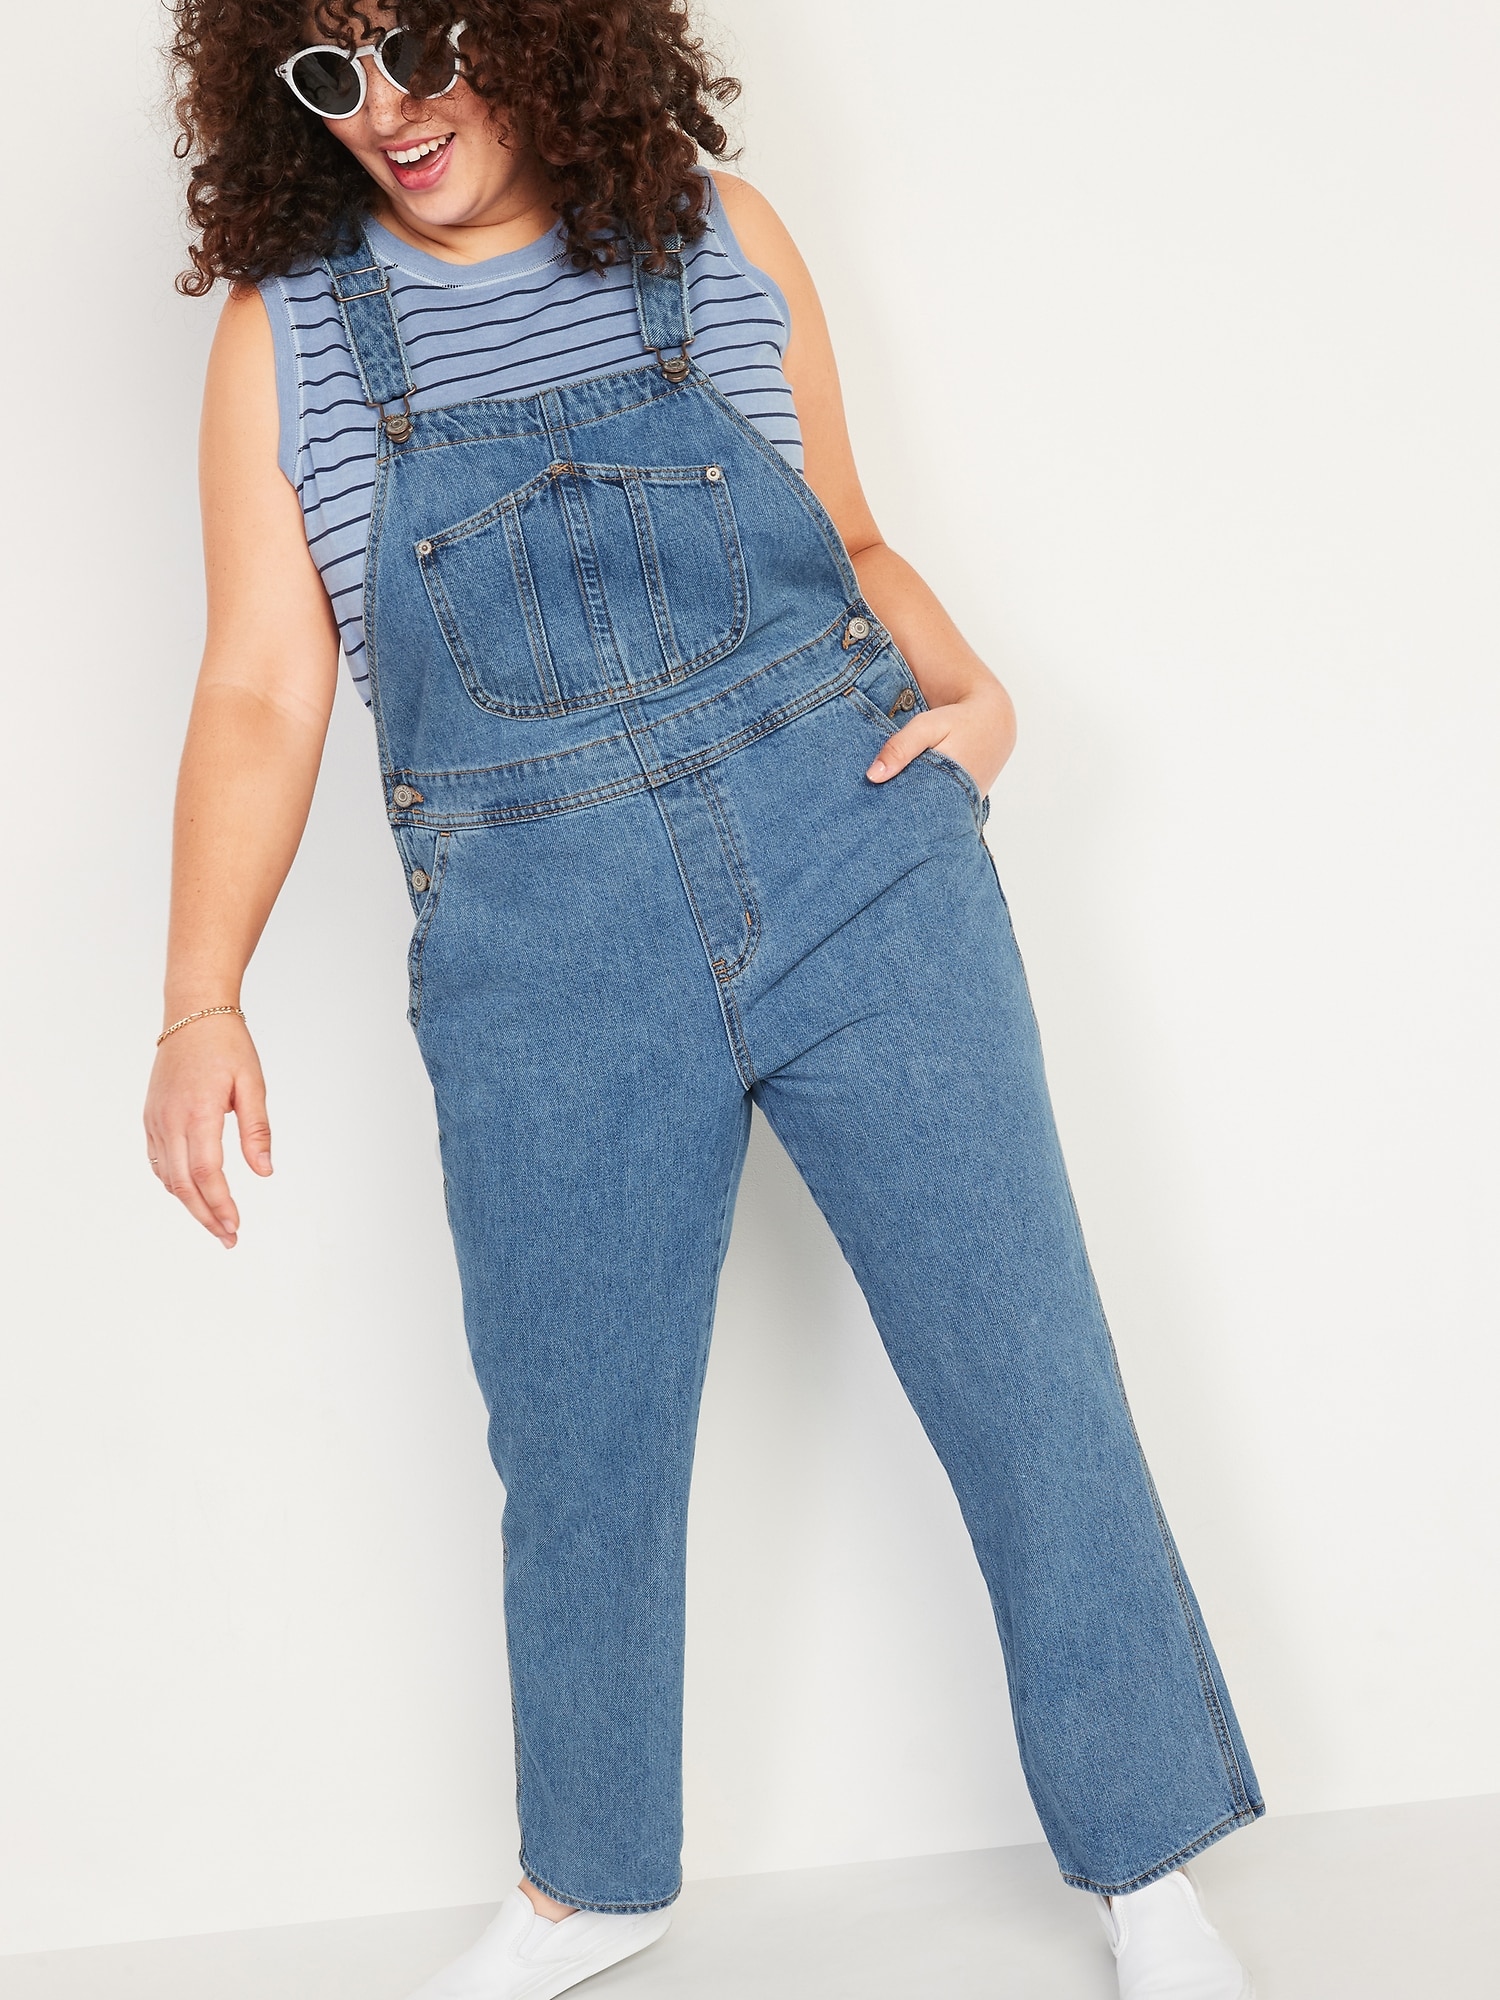 Pinterest | Overalls fashion, Overall outfit, Girl model